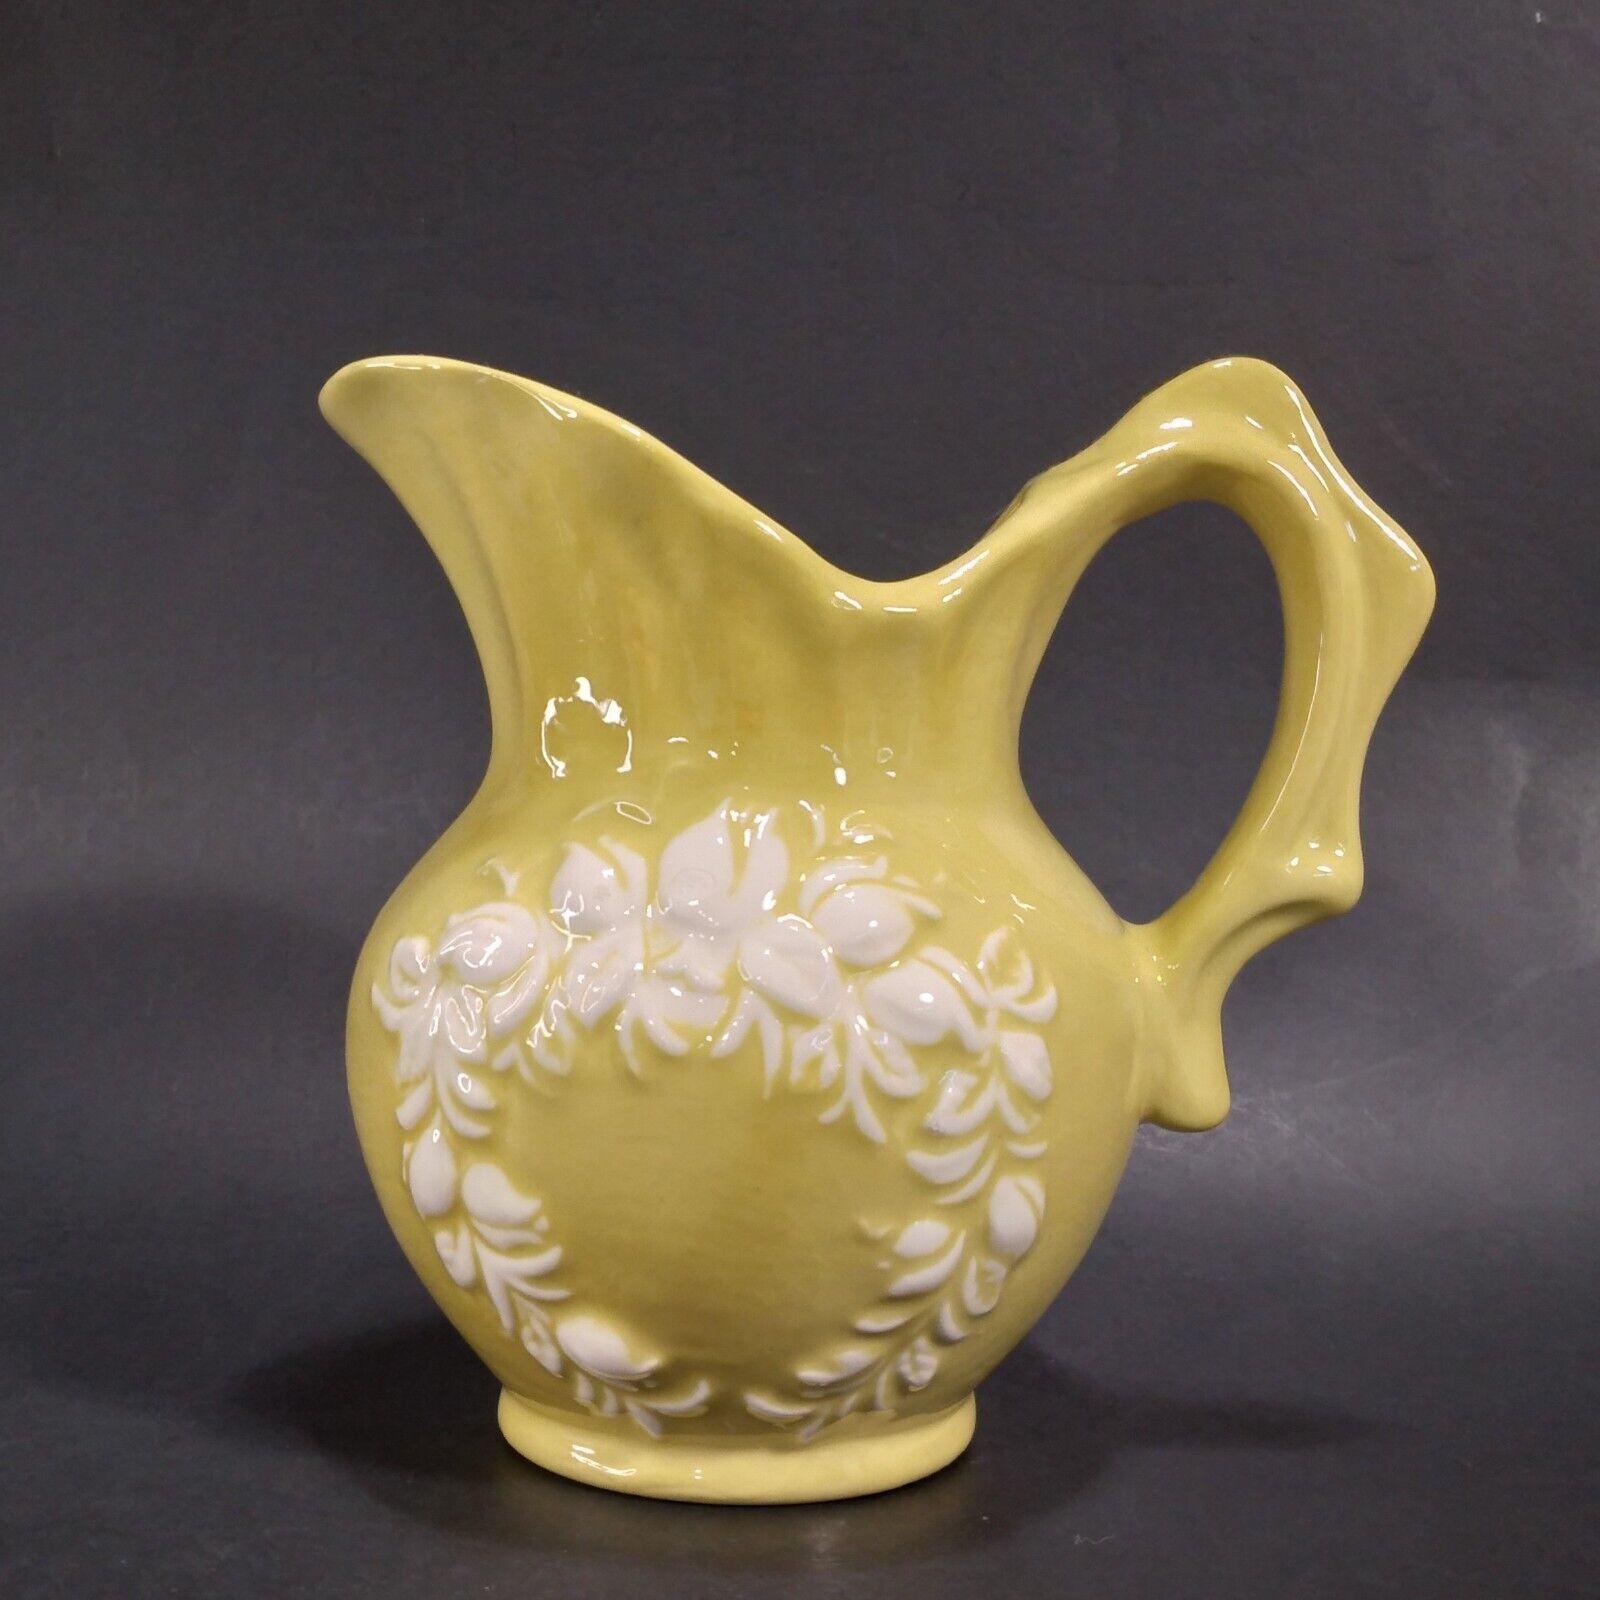 Vintage Small Yellow Decorative Pitcher Vase White Embosssed Floral Tulip Wreath